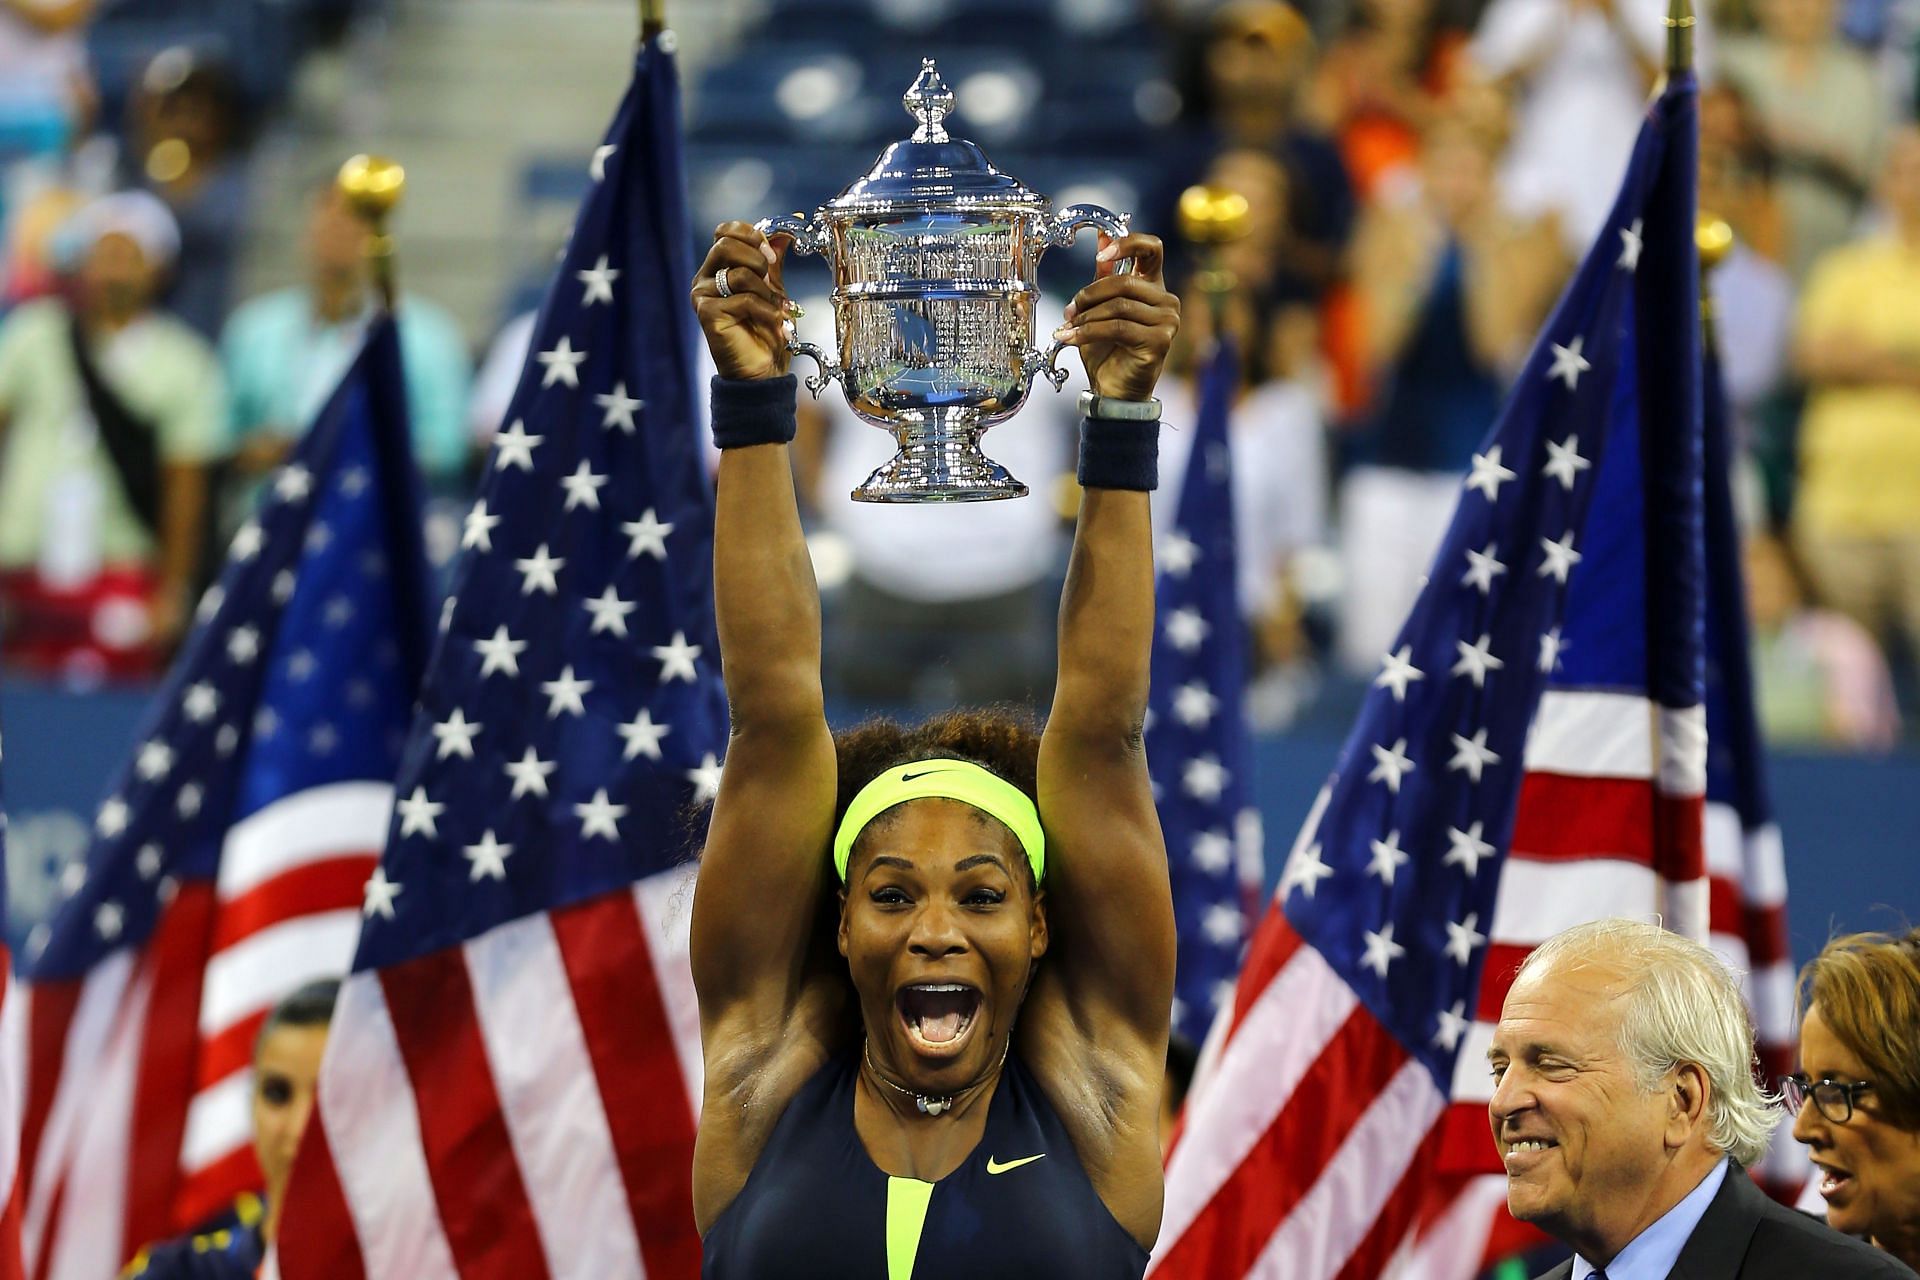 Williams won her fourth US Open title 10 years ago